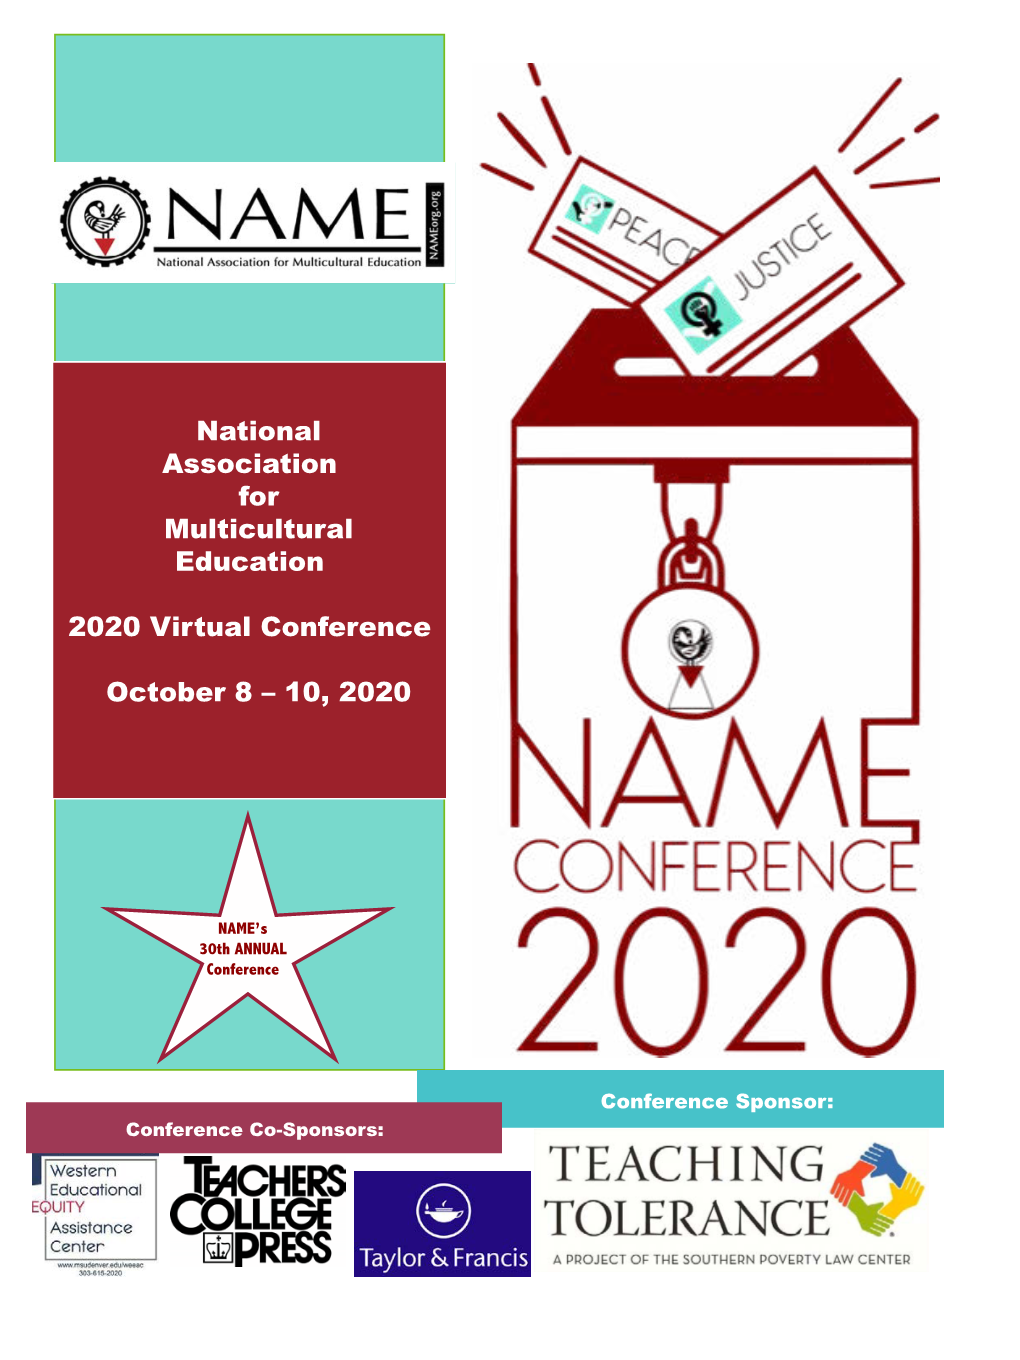 National Association for Multicultural Education 2020 Virtual Conference